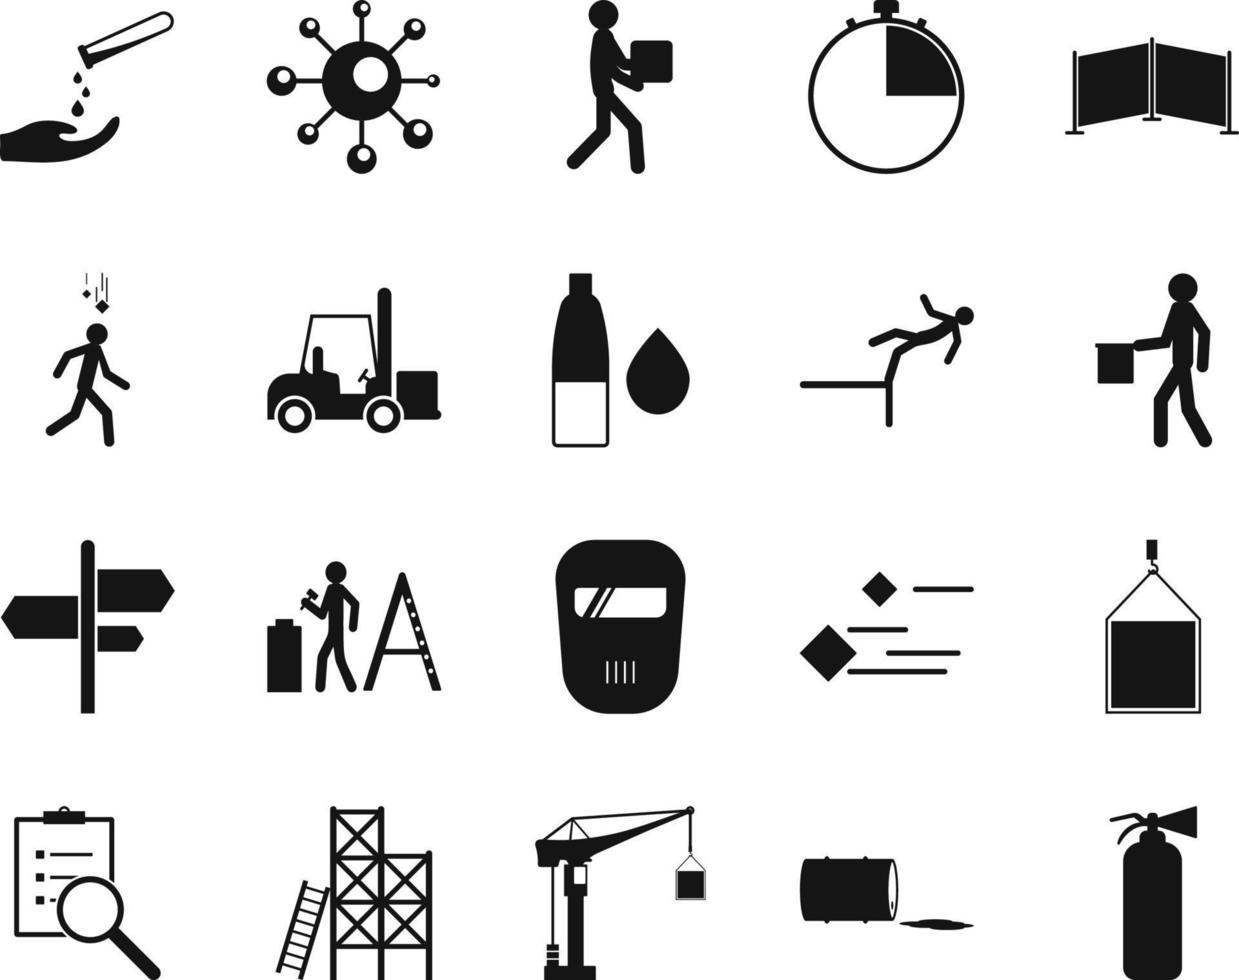 HSE concept, occupational safety and health burn, extinguisher, production factory and environment, labor preventive instructions, worker protection vector icon set on white background